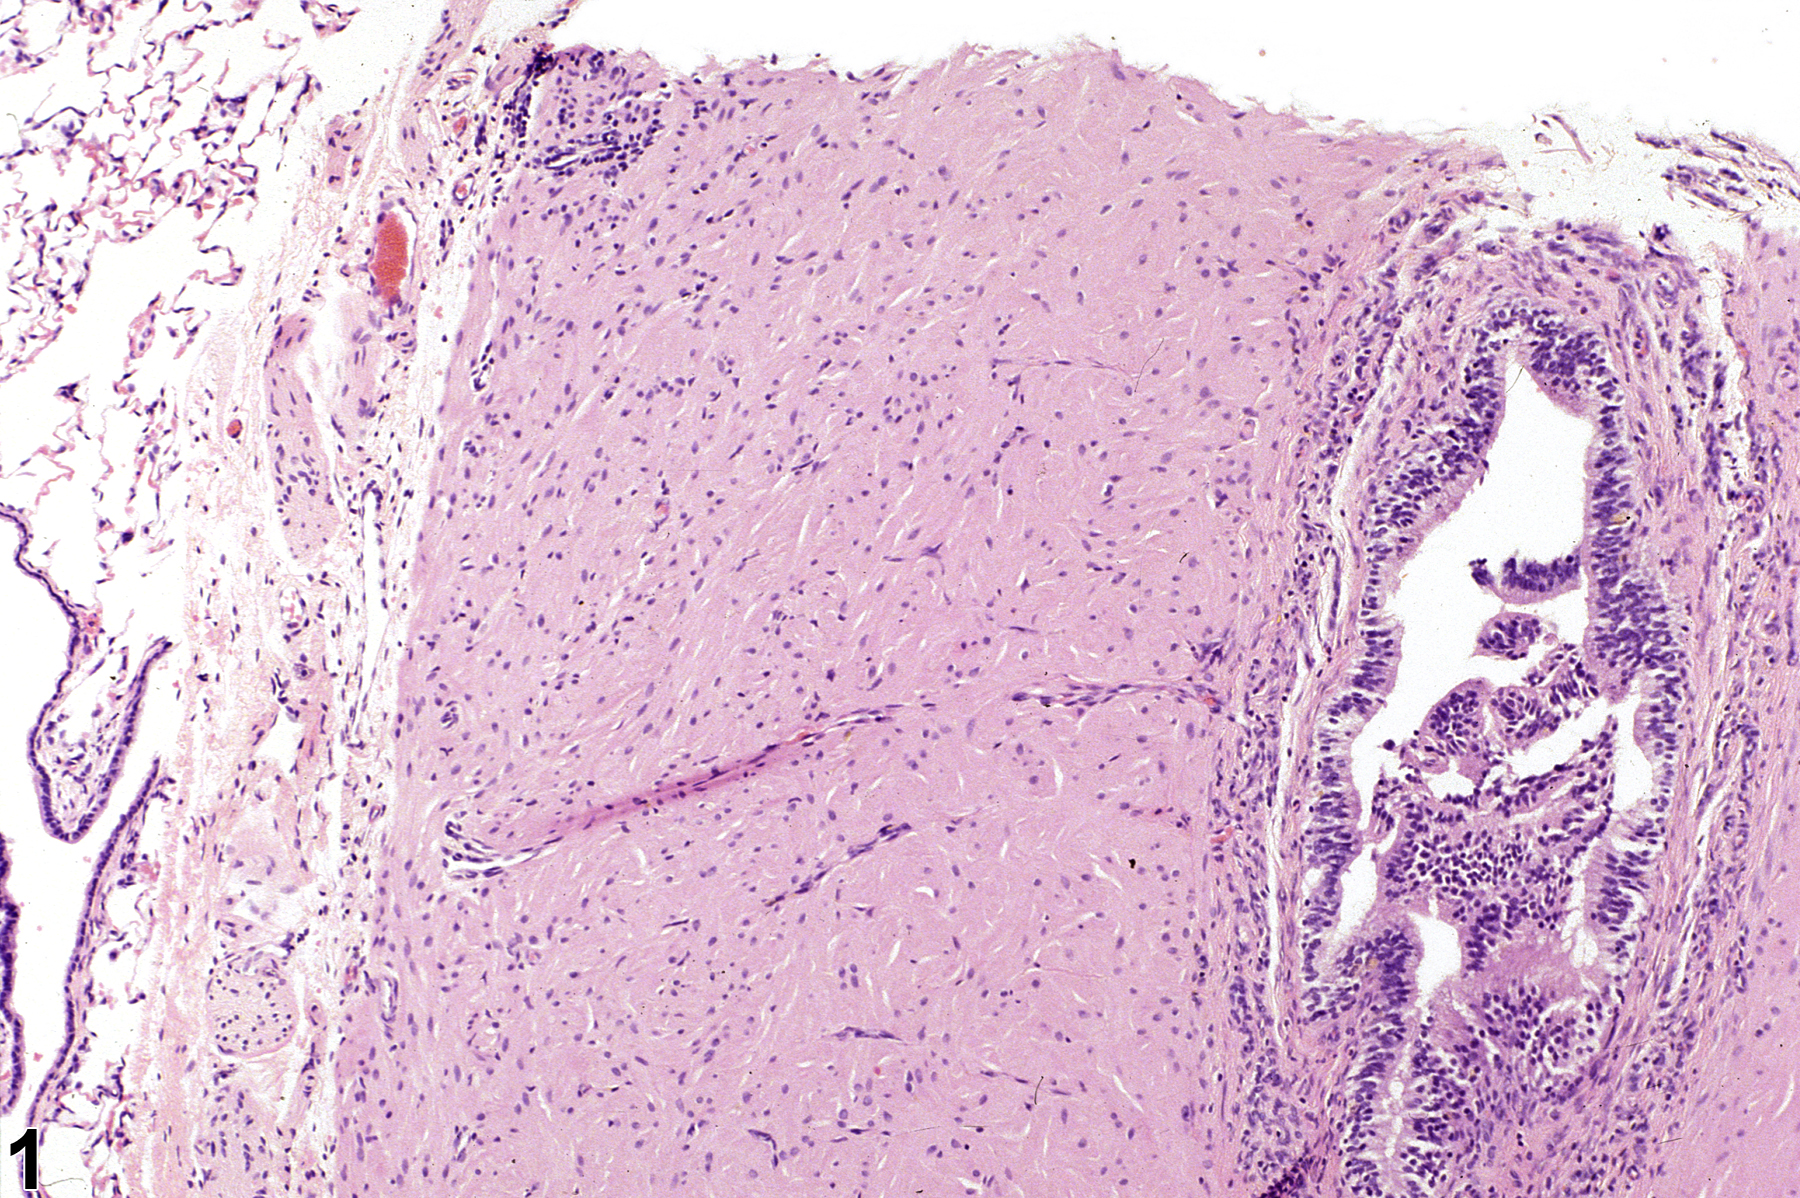 Image of hypertrophy, smooth muscle in the lung from a male F344/N rat in a chronic study